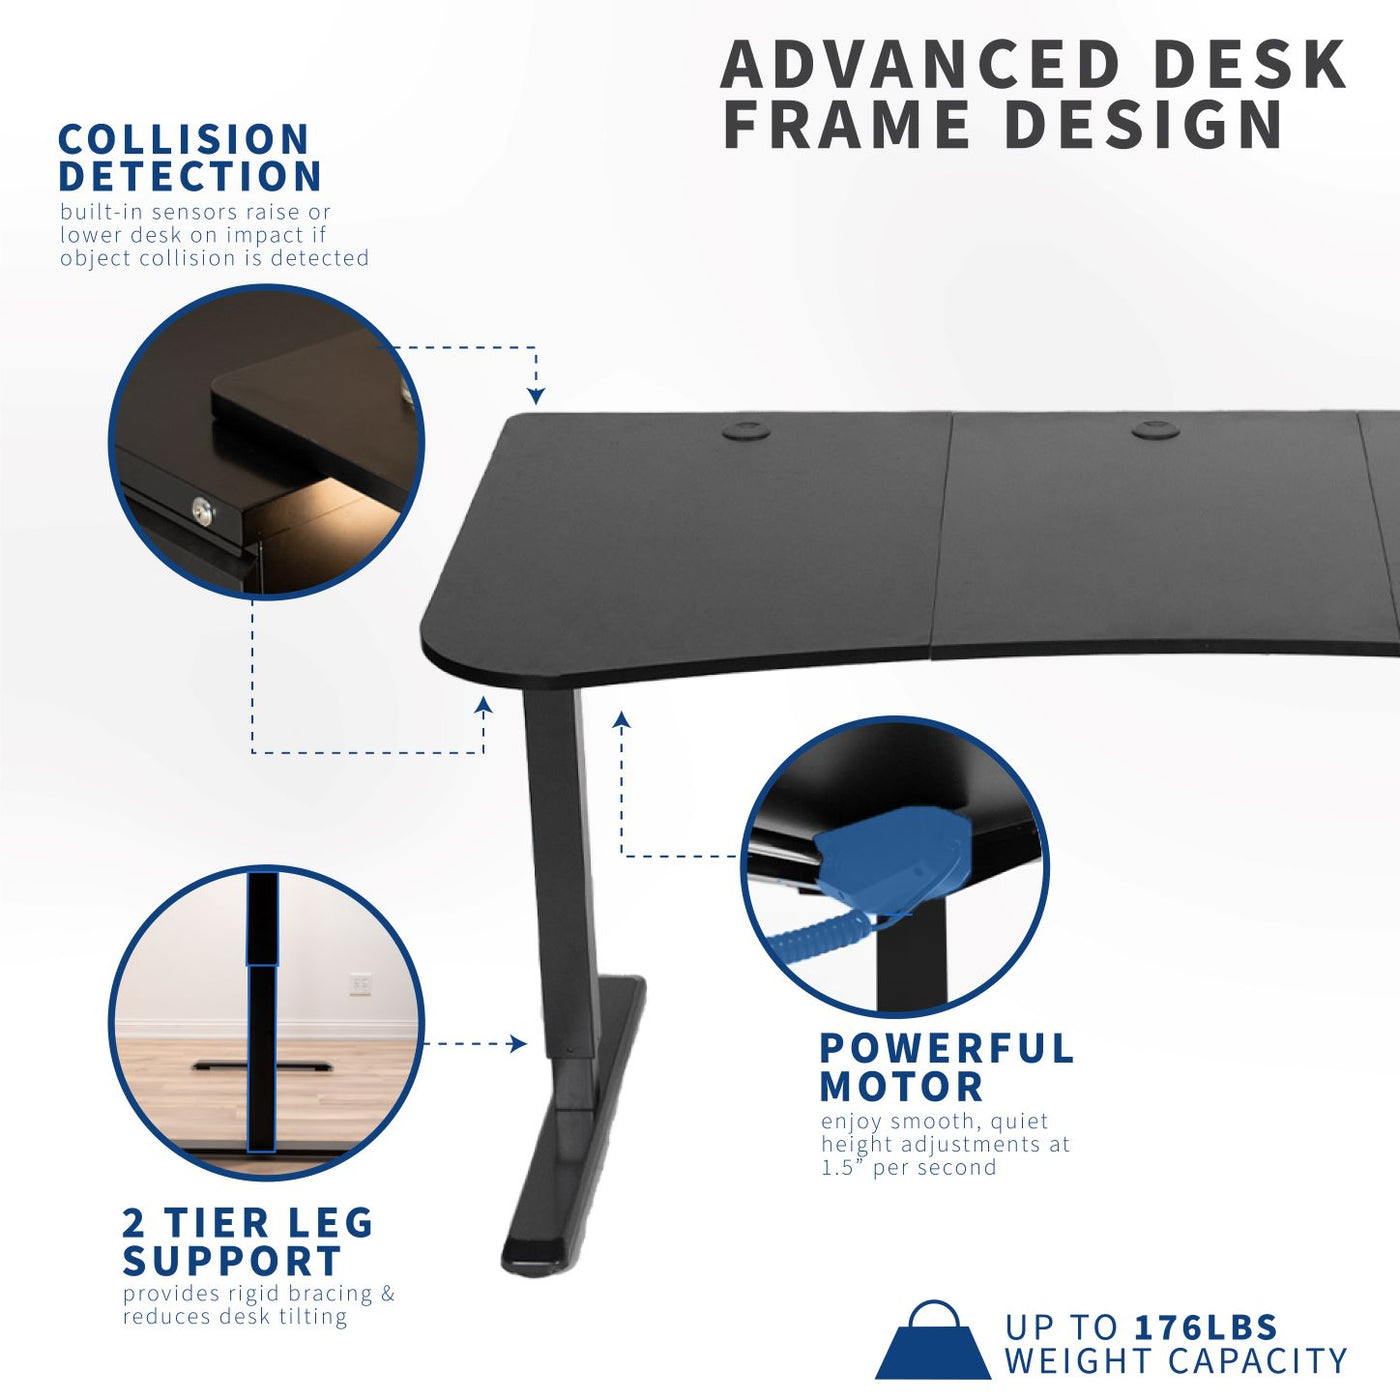 Two-tier leg support and a powerful motor make this desk and frame advanced.